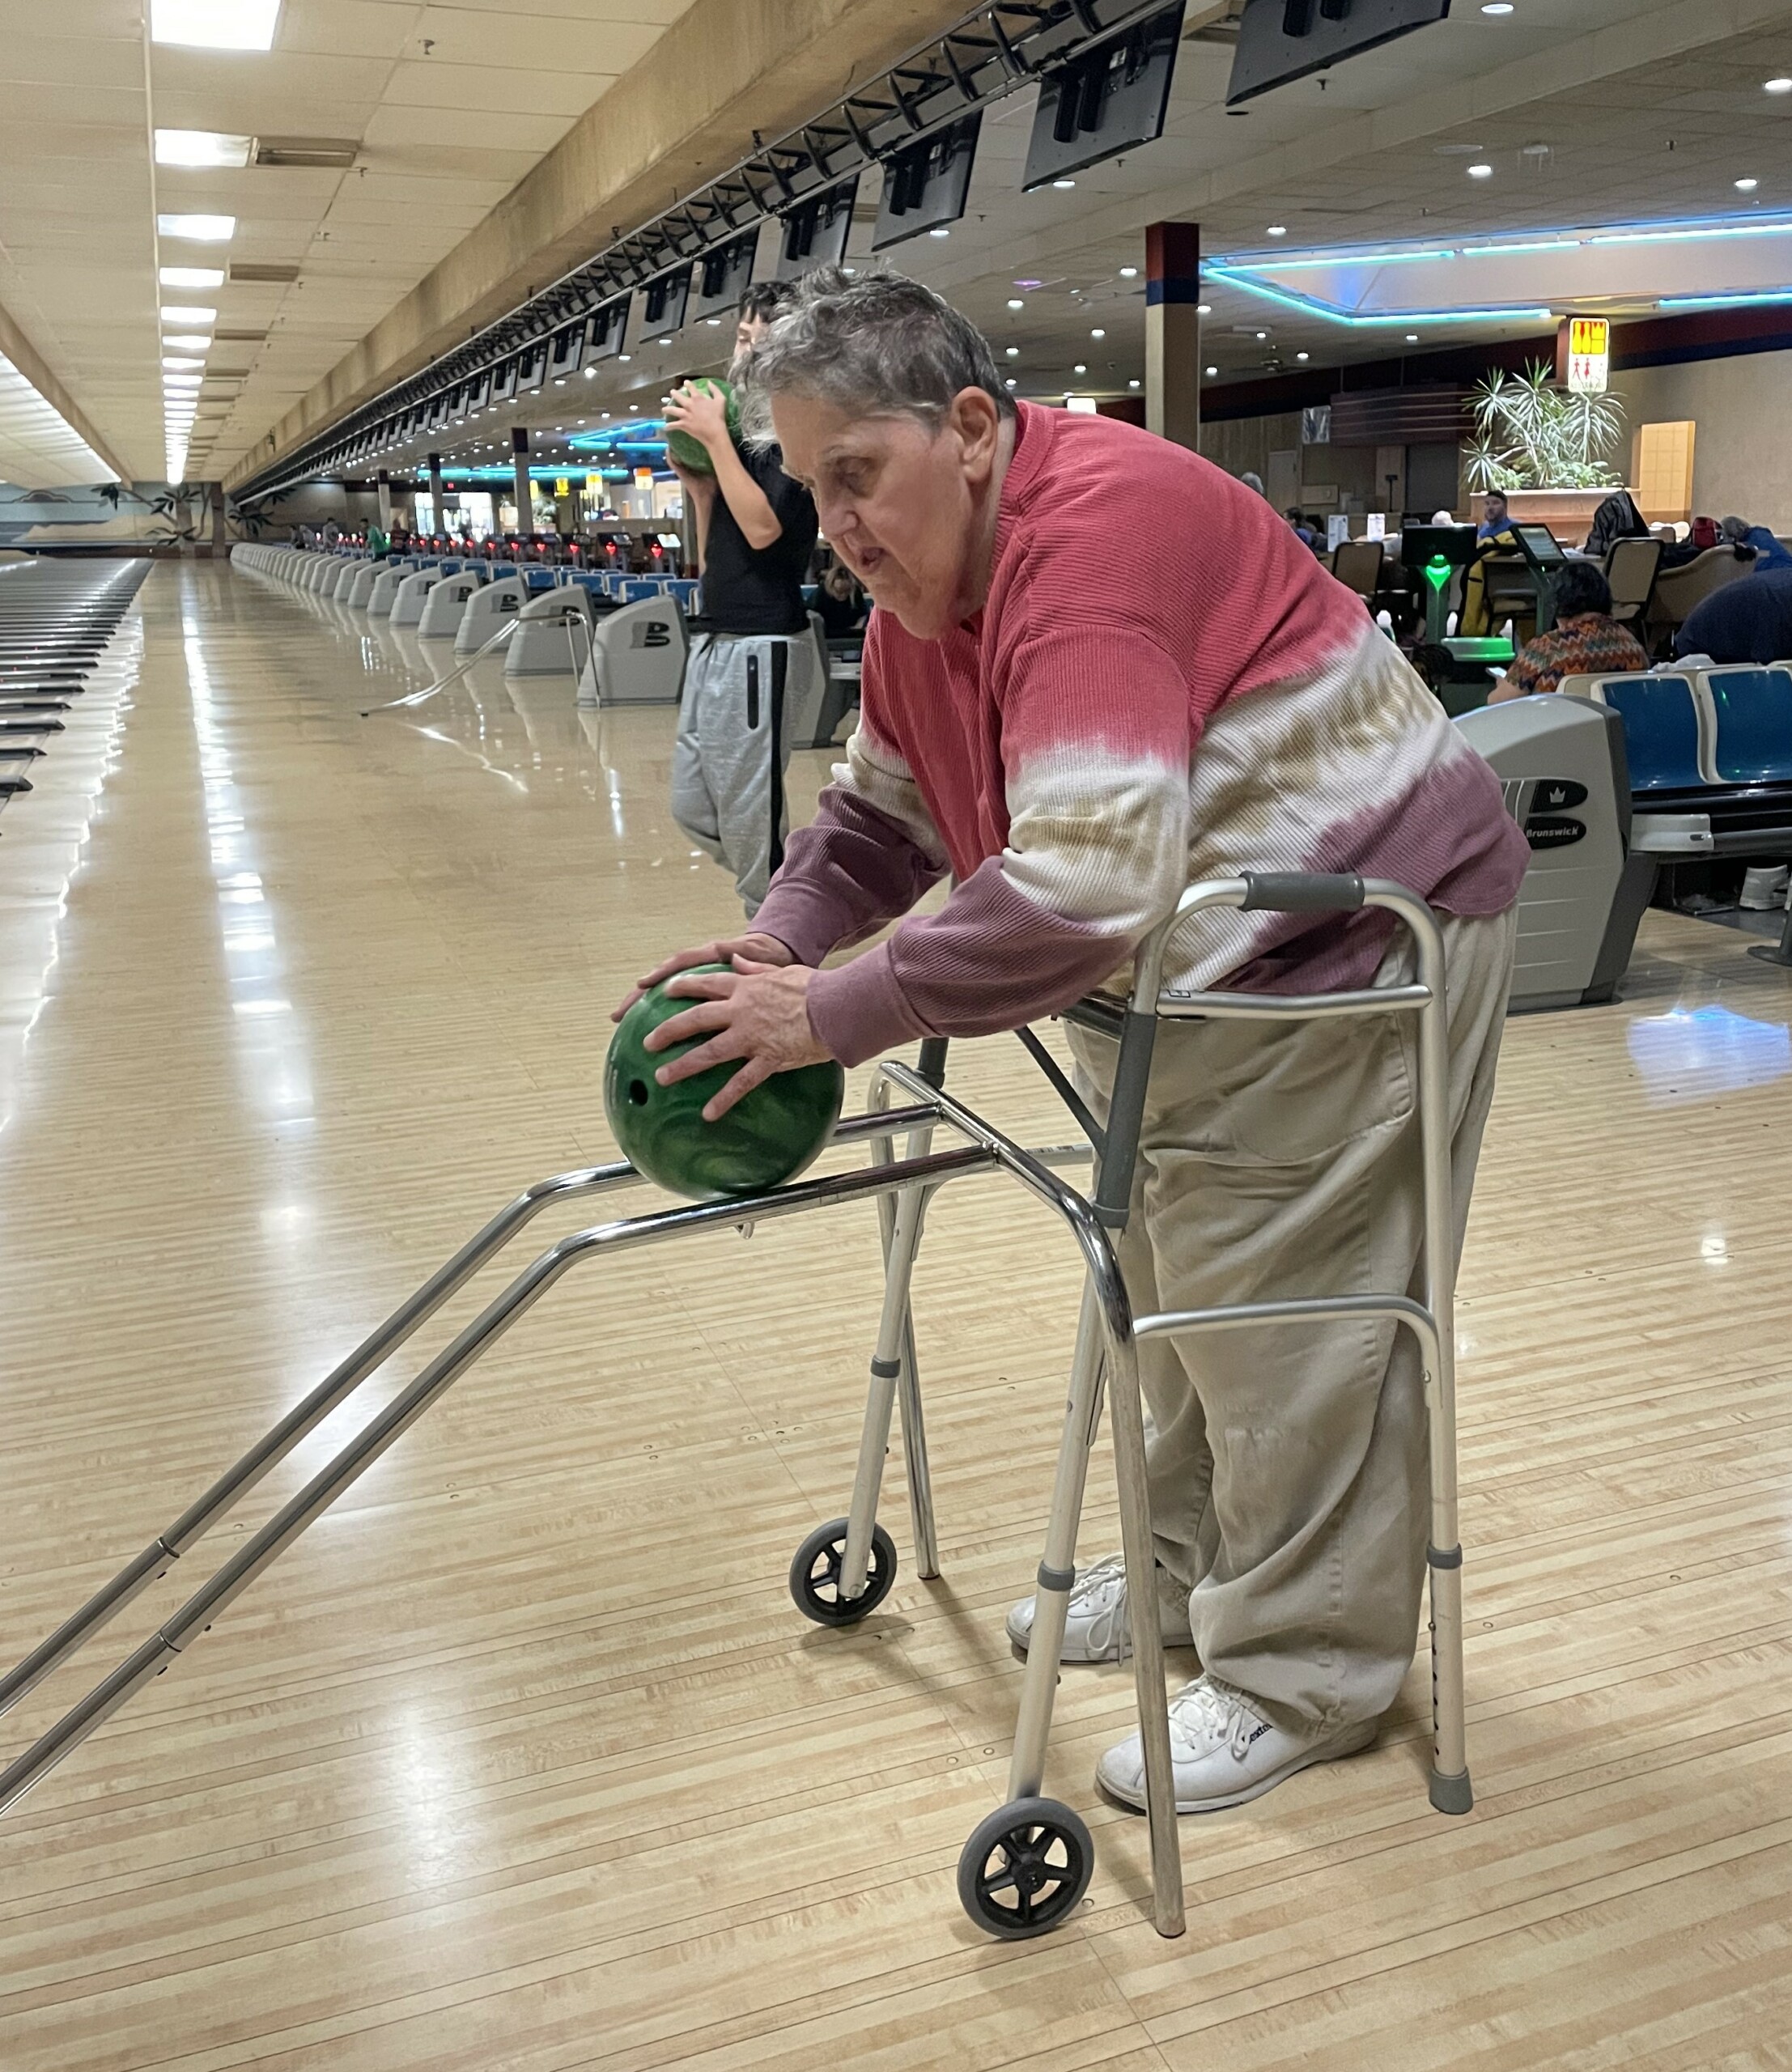 Elderly woman with disabilities using a ball ramp to roll bowling ball down the lane